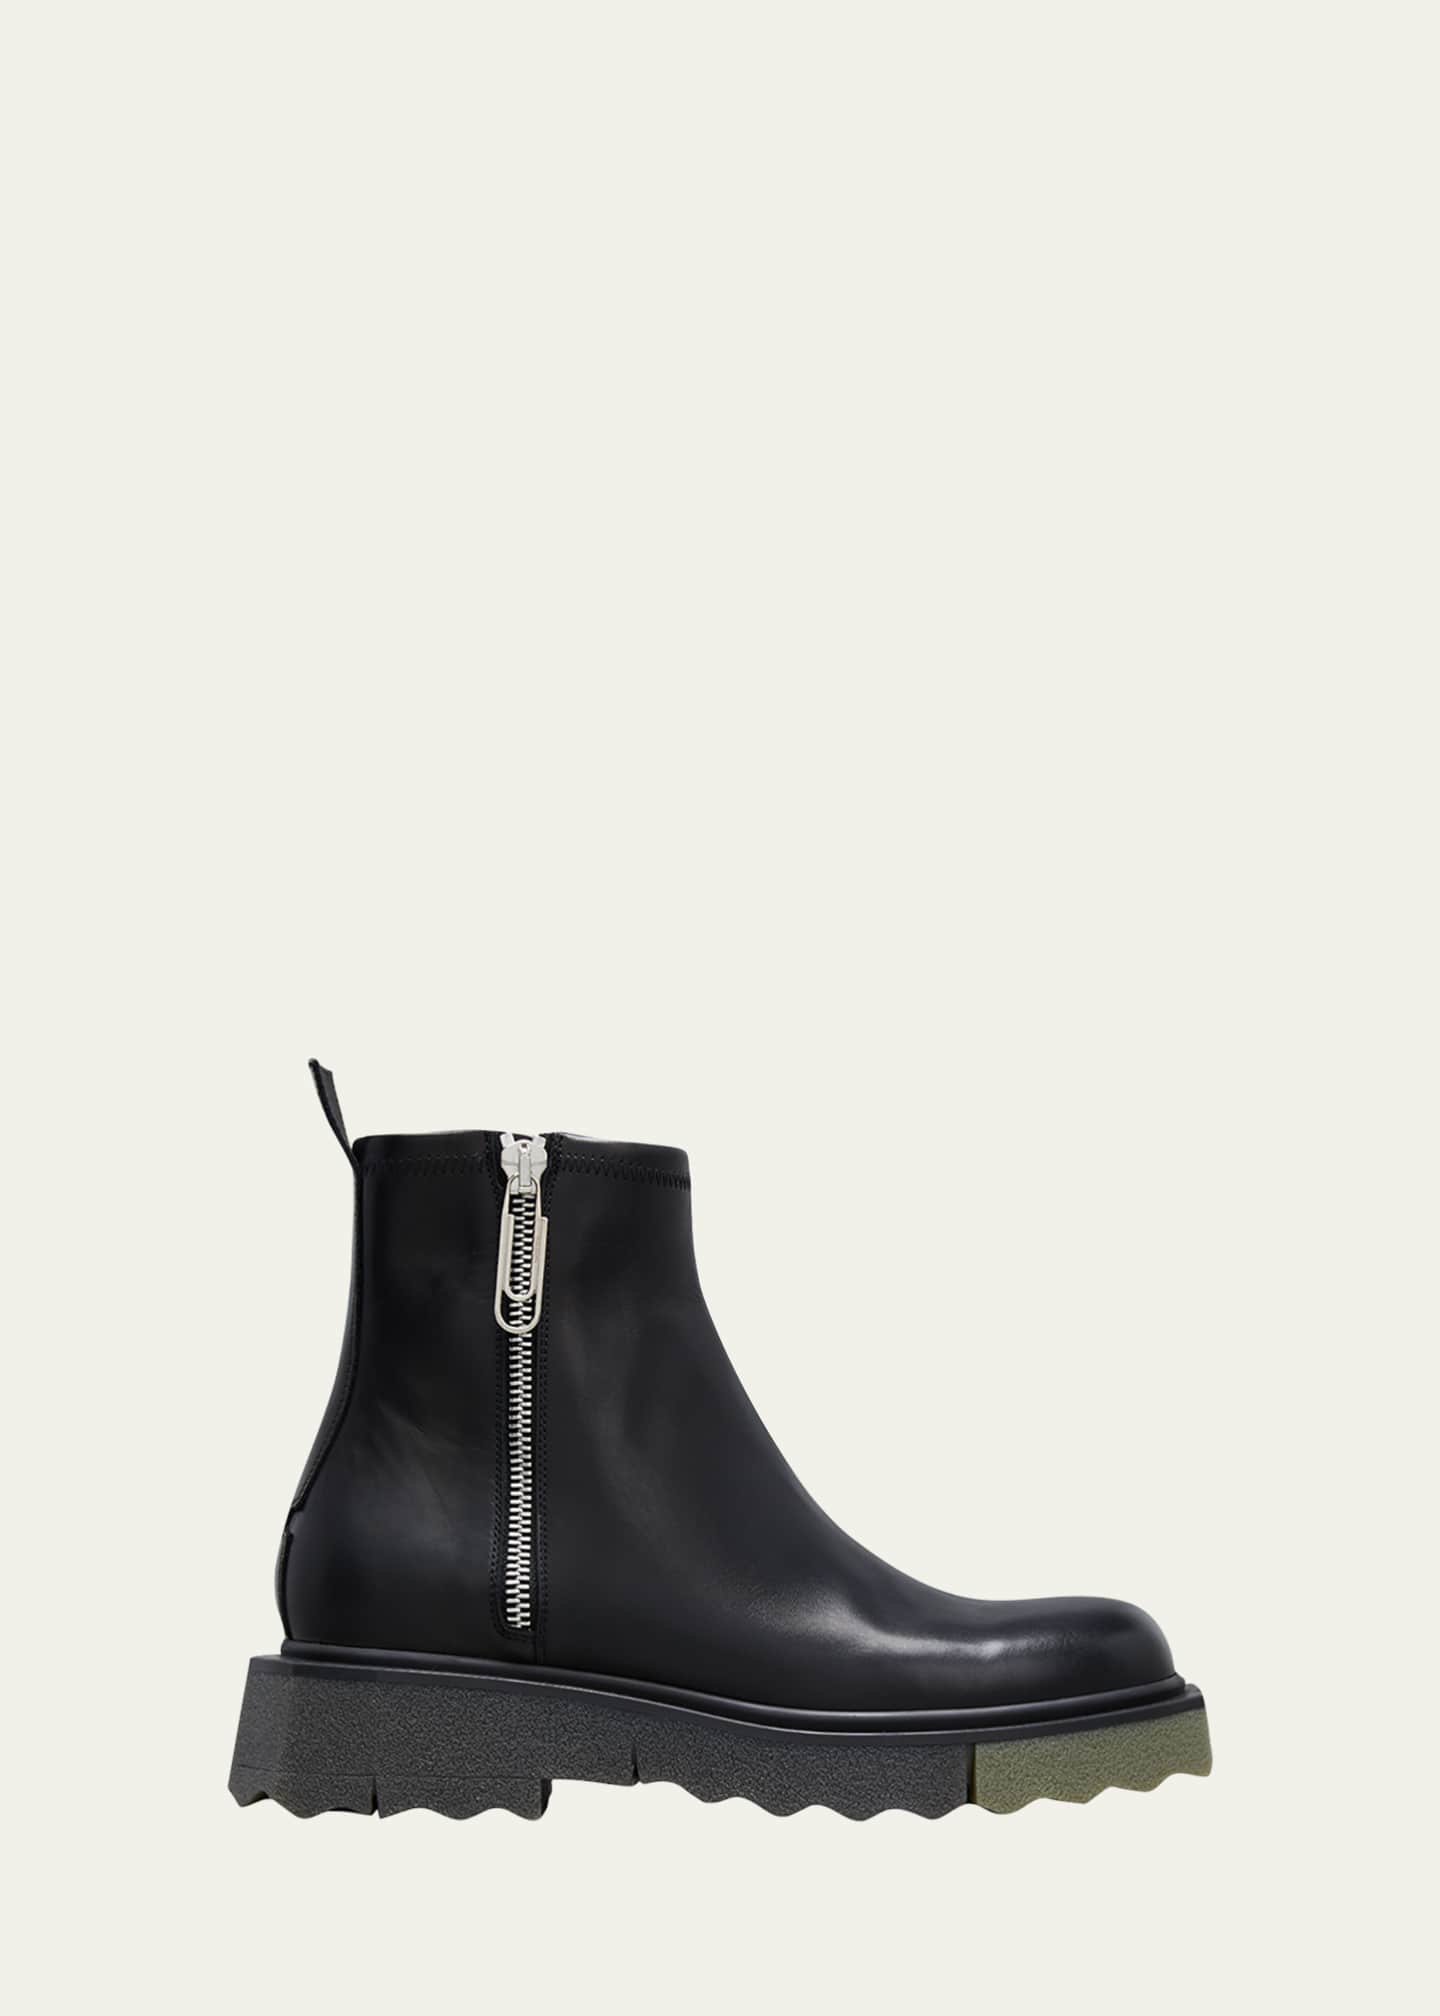 Off-White Men's Sponge Sole Leather Zip Military Ankle Boot - Bergdorf ...